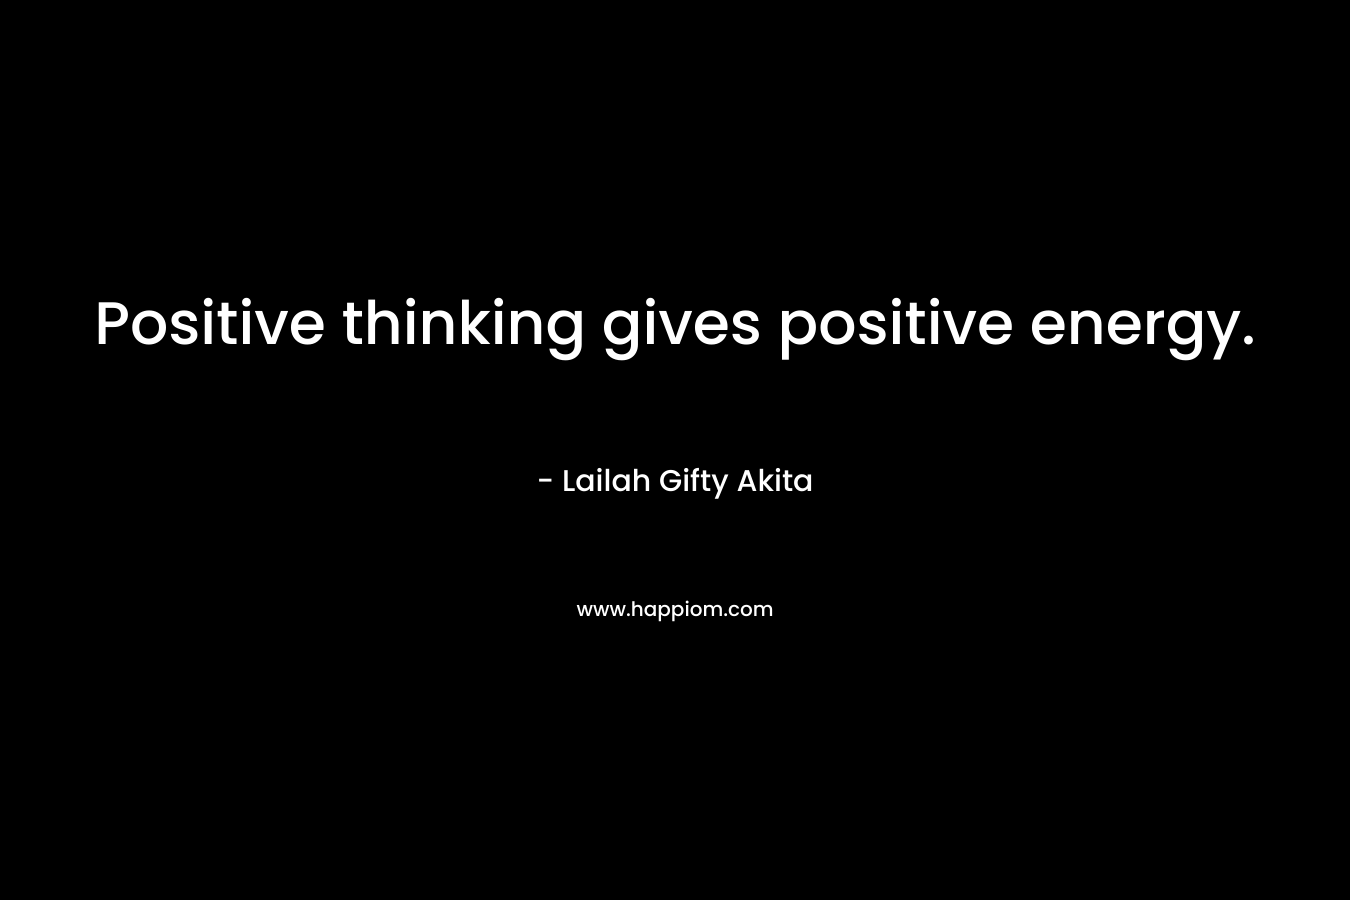 Positive thinking gives positive energy.